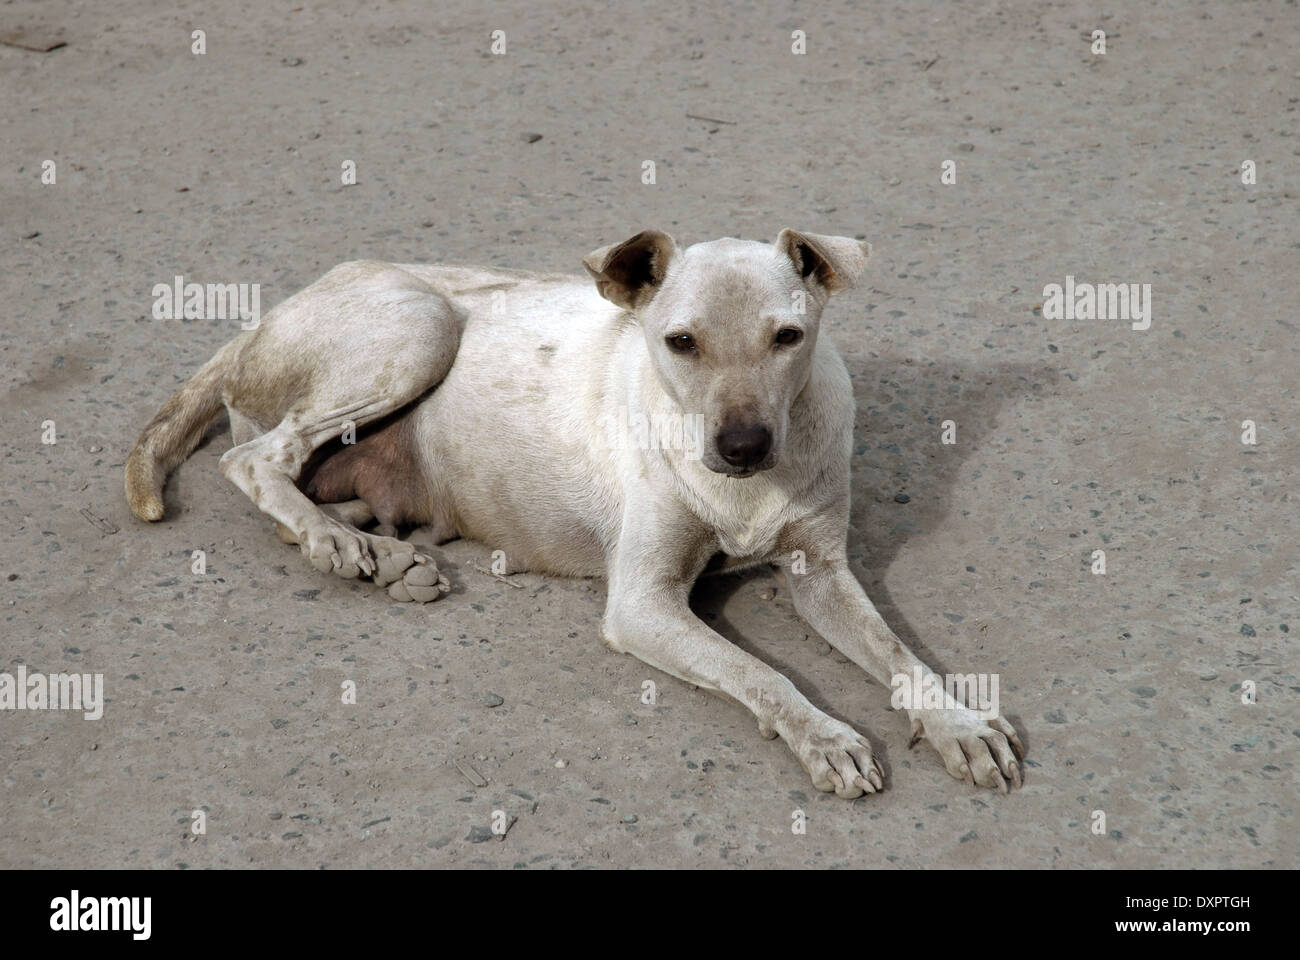 Page 3 - Dog With Mange High Resolution Stock Photography and Images - Alamy